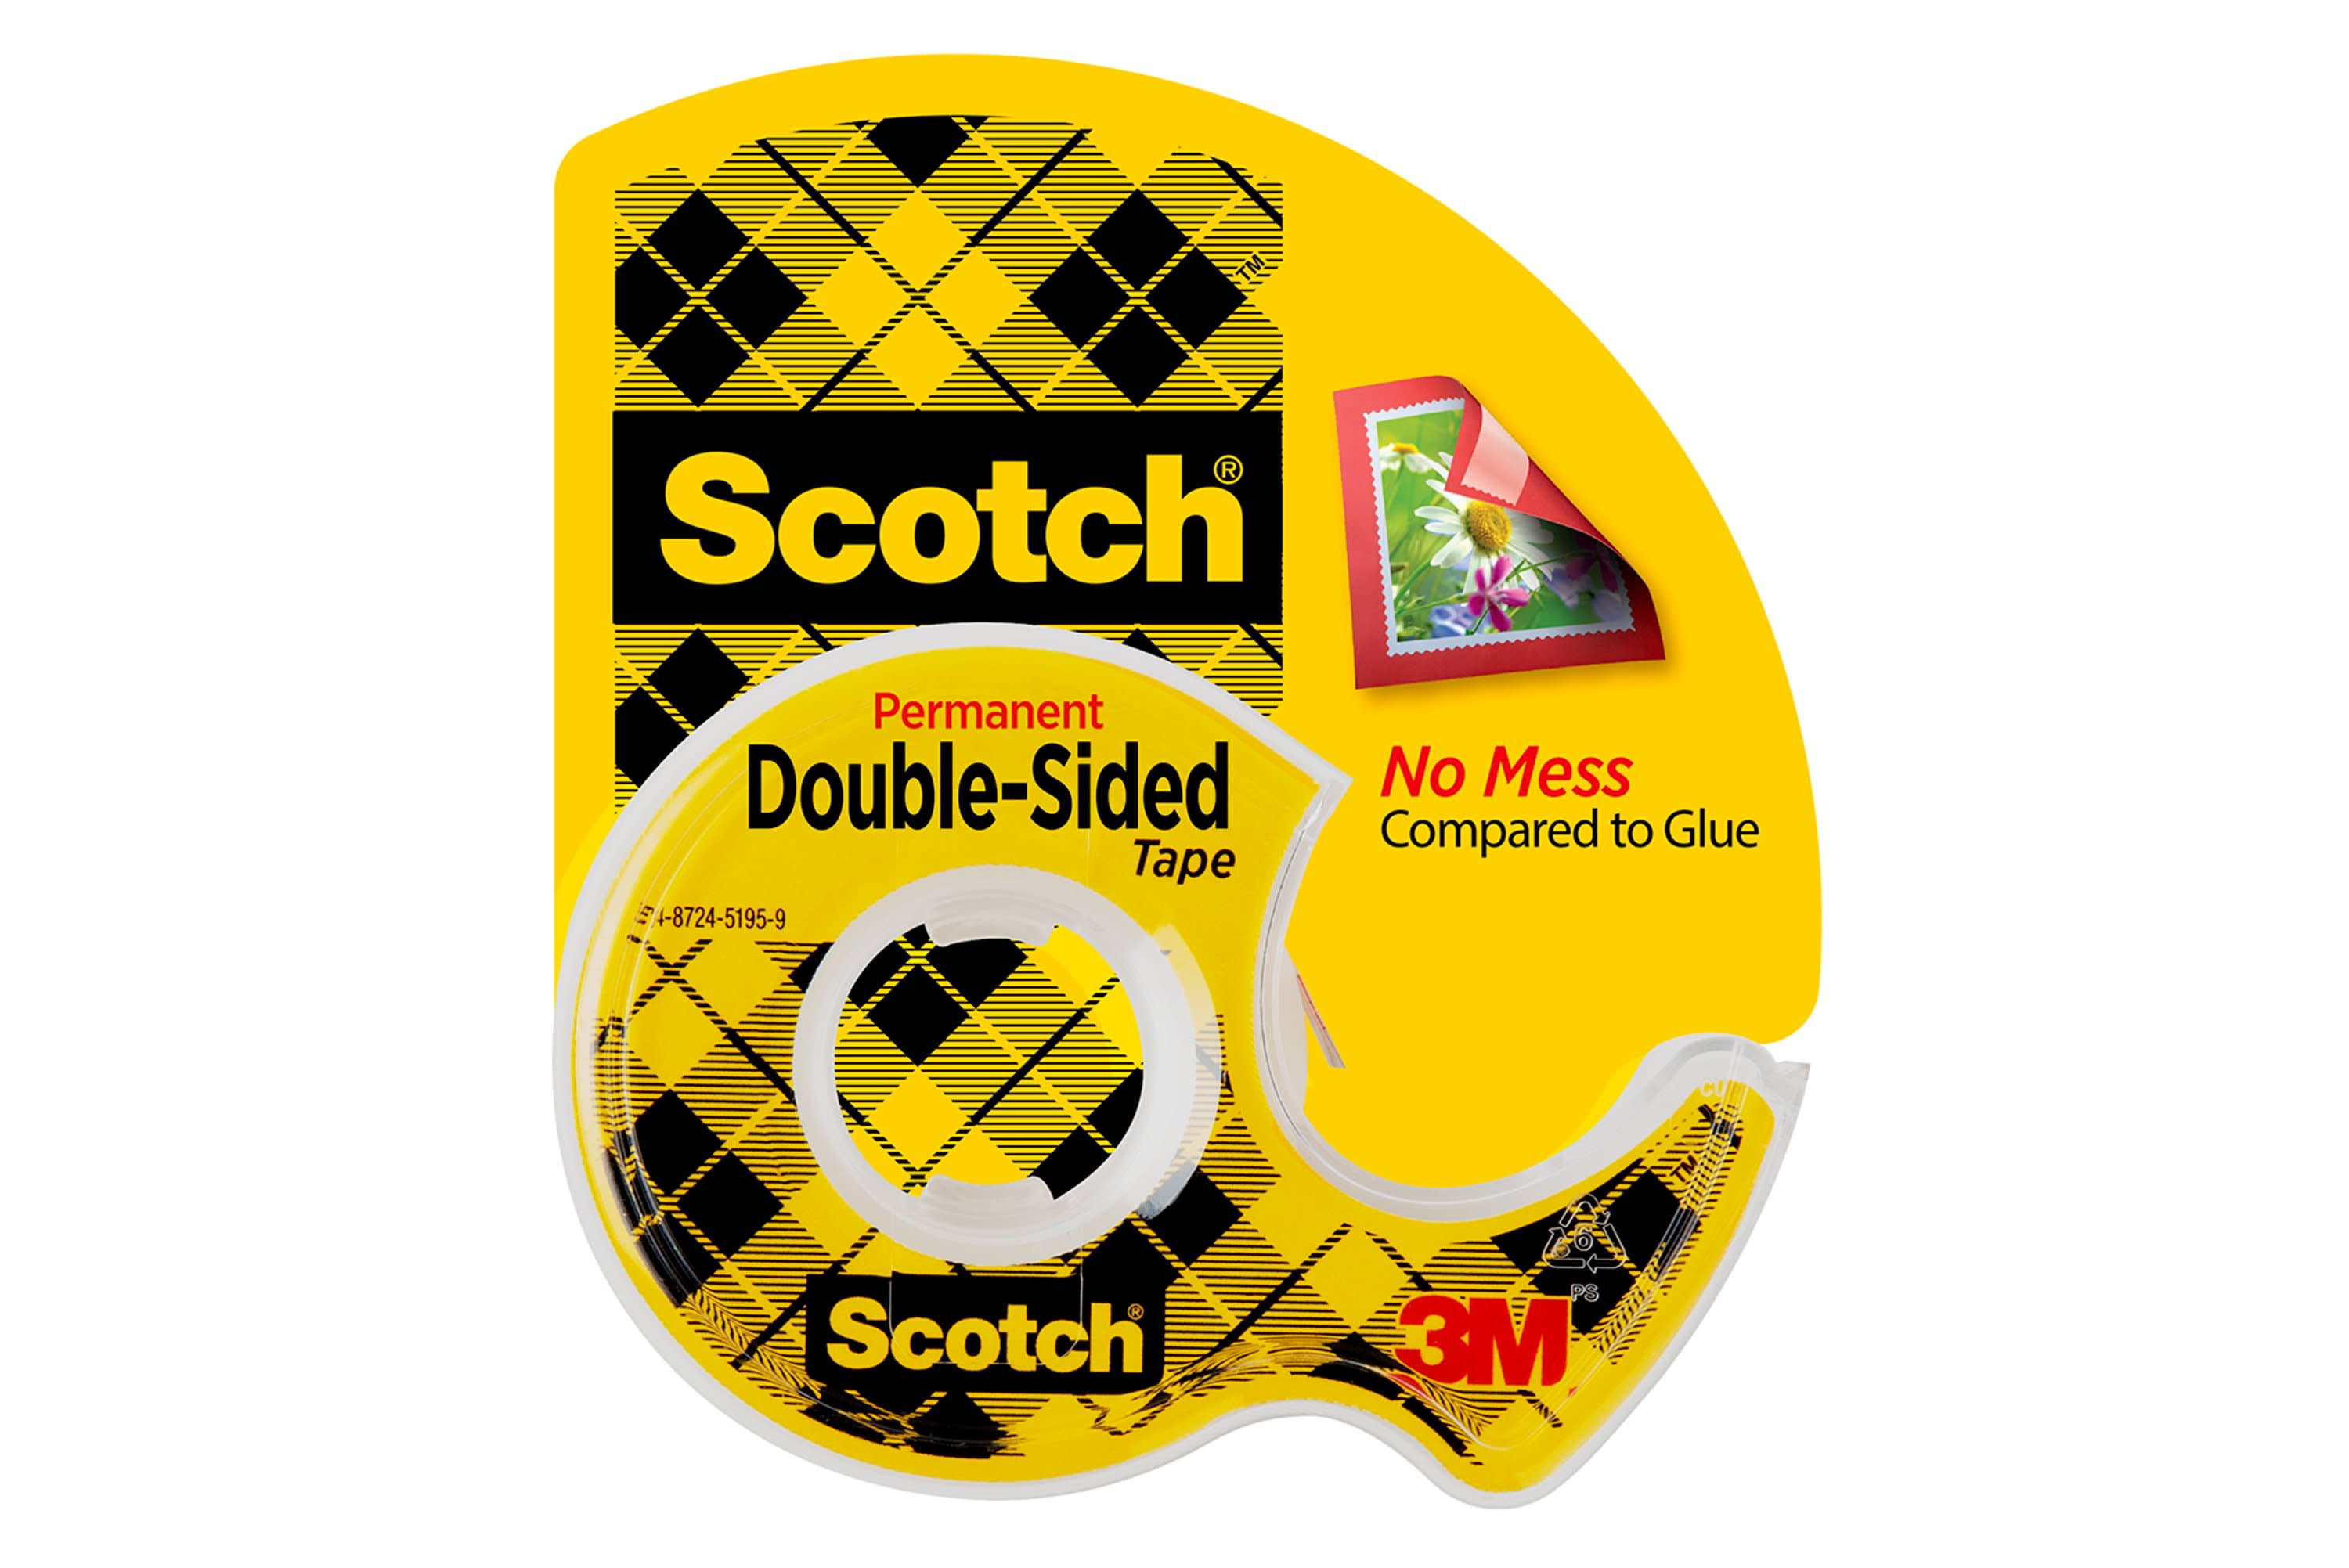 Scotch 665 Double-Sided Tape in Handheld Dispenser, 0.50 x 250 Inches, Clear